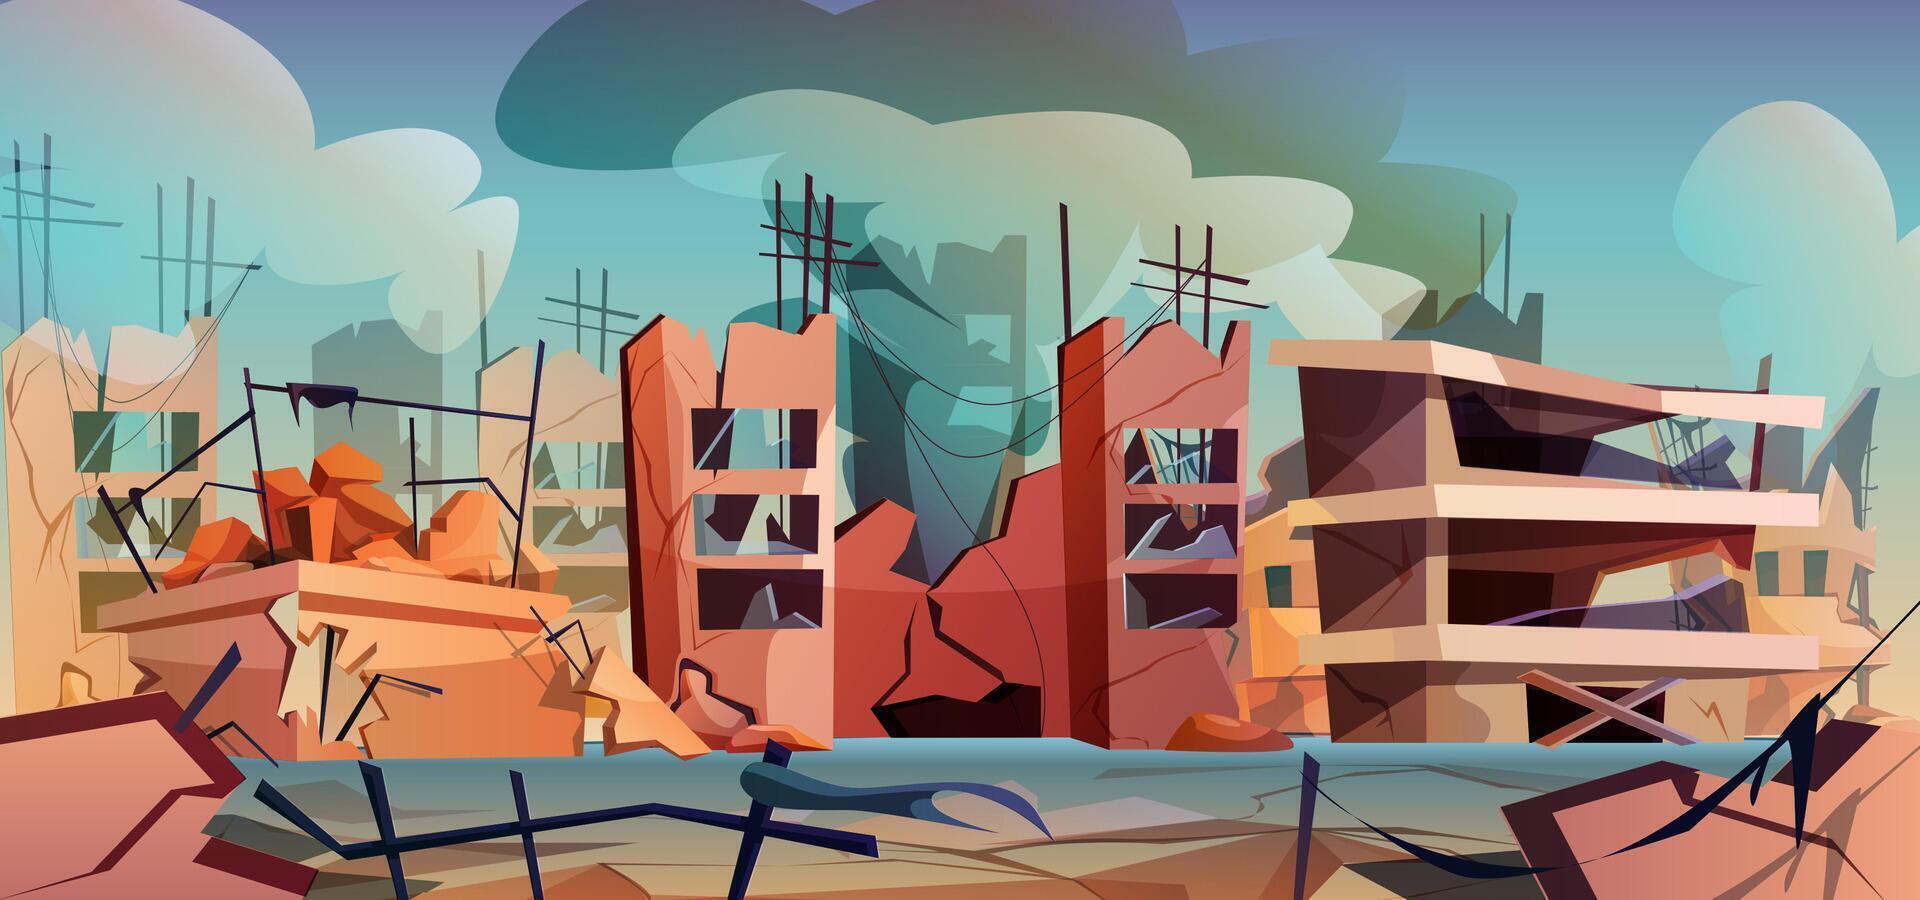 Destroyed city buildings after destruction or earthquake. Abandoned houses in war zone with smoke and cracked street. Ruins with broken road after cataclysm. Disaster landscape with cracks and damages vector